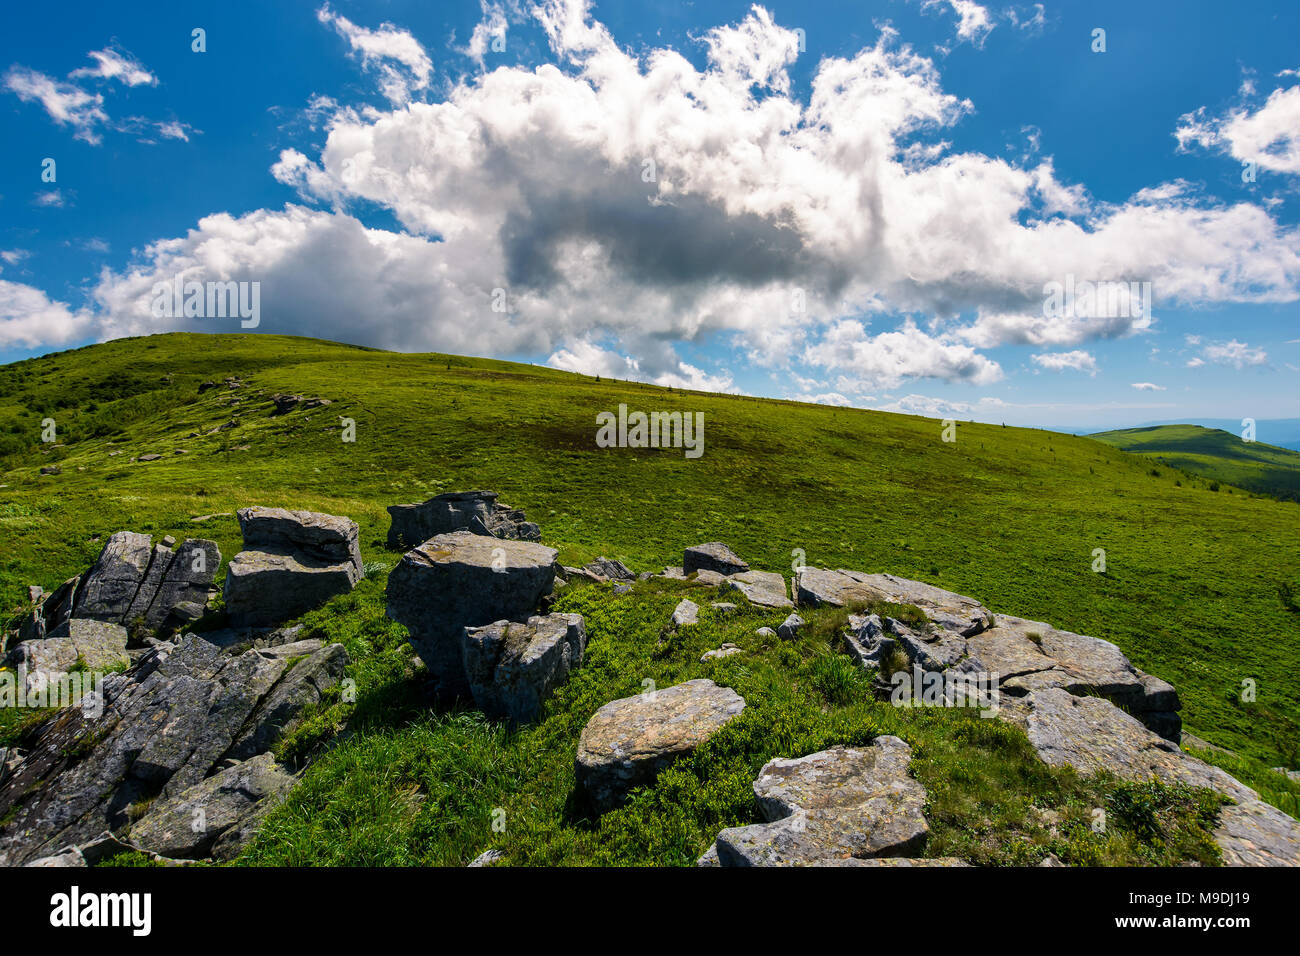 huge cloud rising behind the hill. gorgeous mountain landscape with boulders on grassy slopes Stock Photo